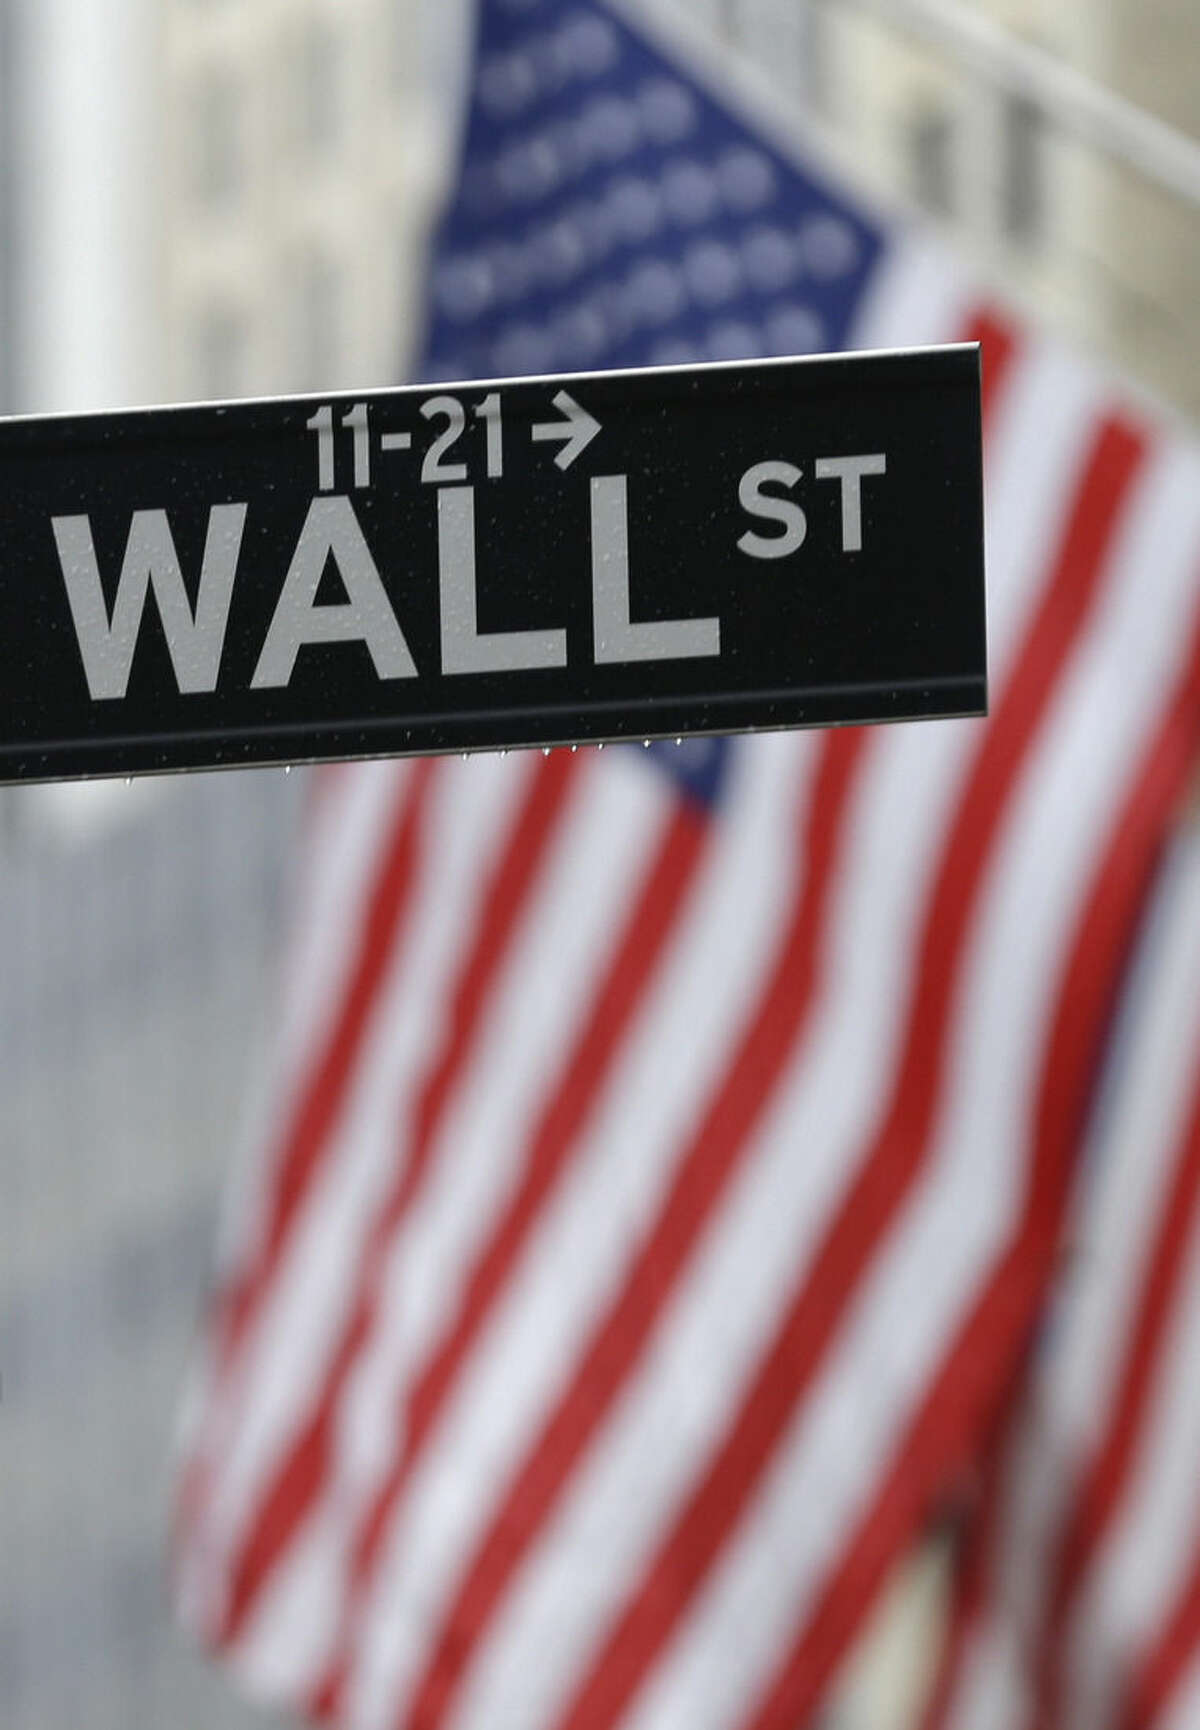 FILE - In this July 9, 2015 file photo, a Wall Street sign is seen near the New York Stock Exchange in New York. U.S. stocks moved lower on the last day of the year as the market headed for a sluggish end to 2015. (AP Photo/Seth Wenig, File)